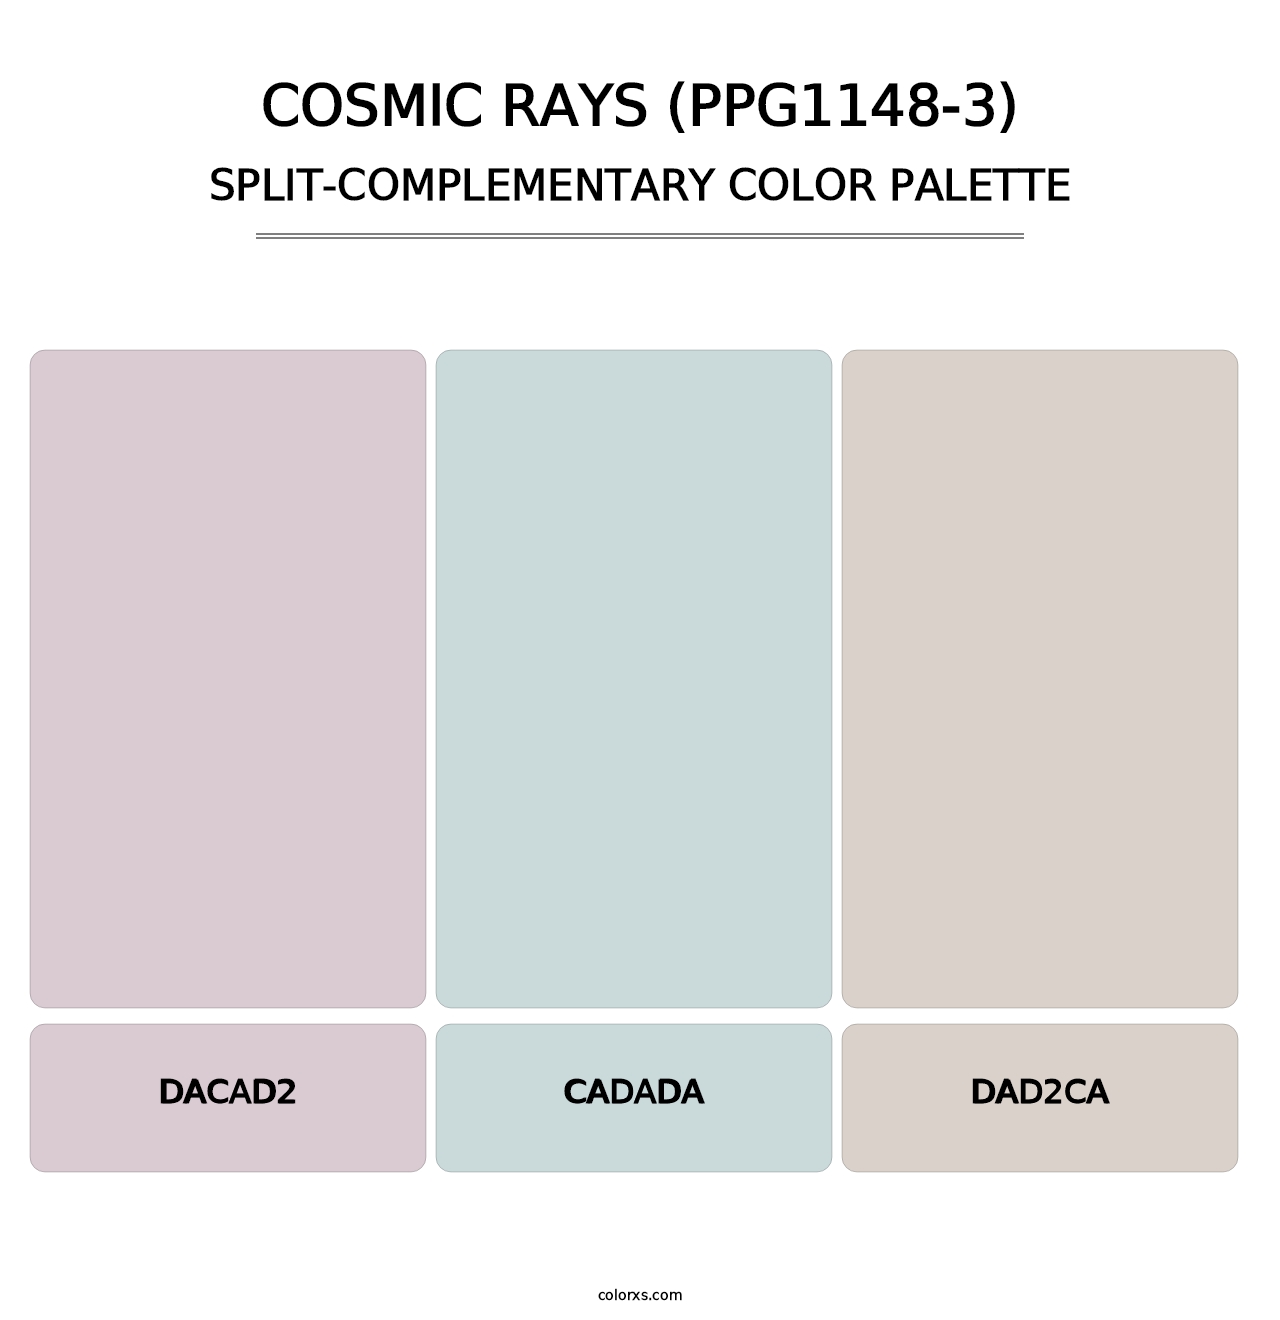 Cosmic Rays (PPG1148-3) - Split-Complementary Color Palette